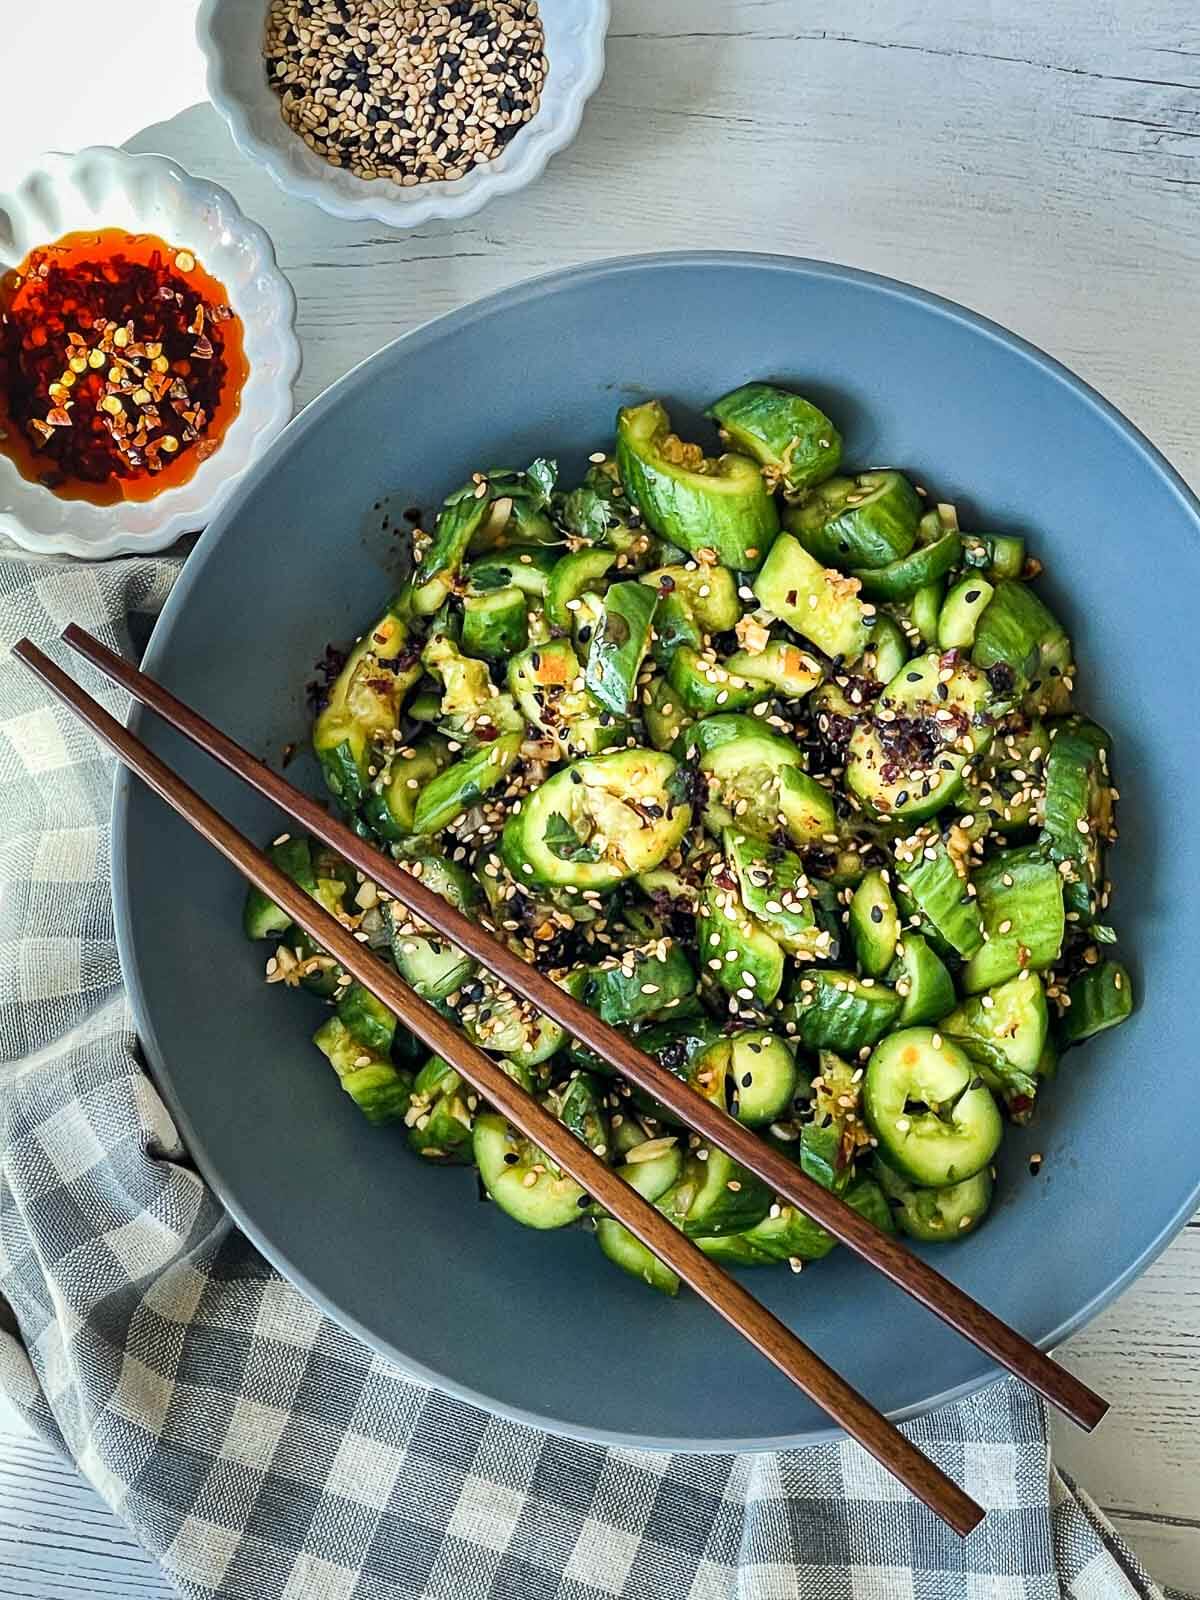 Smashed cucumber salad in a gray bowl with wooden chopsticks on top and a small white bowl of chili oil, sesame seeds, and a checkered napkin on the side.